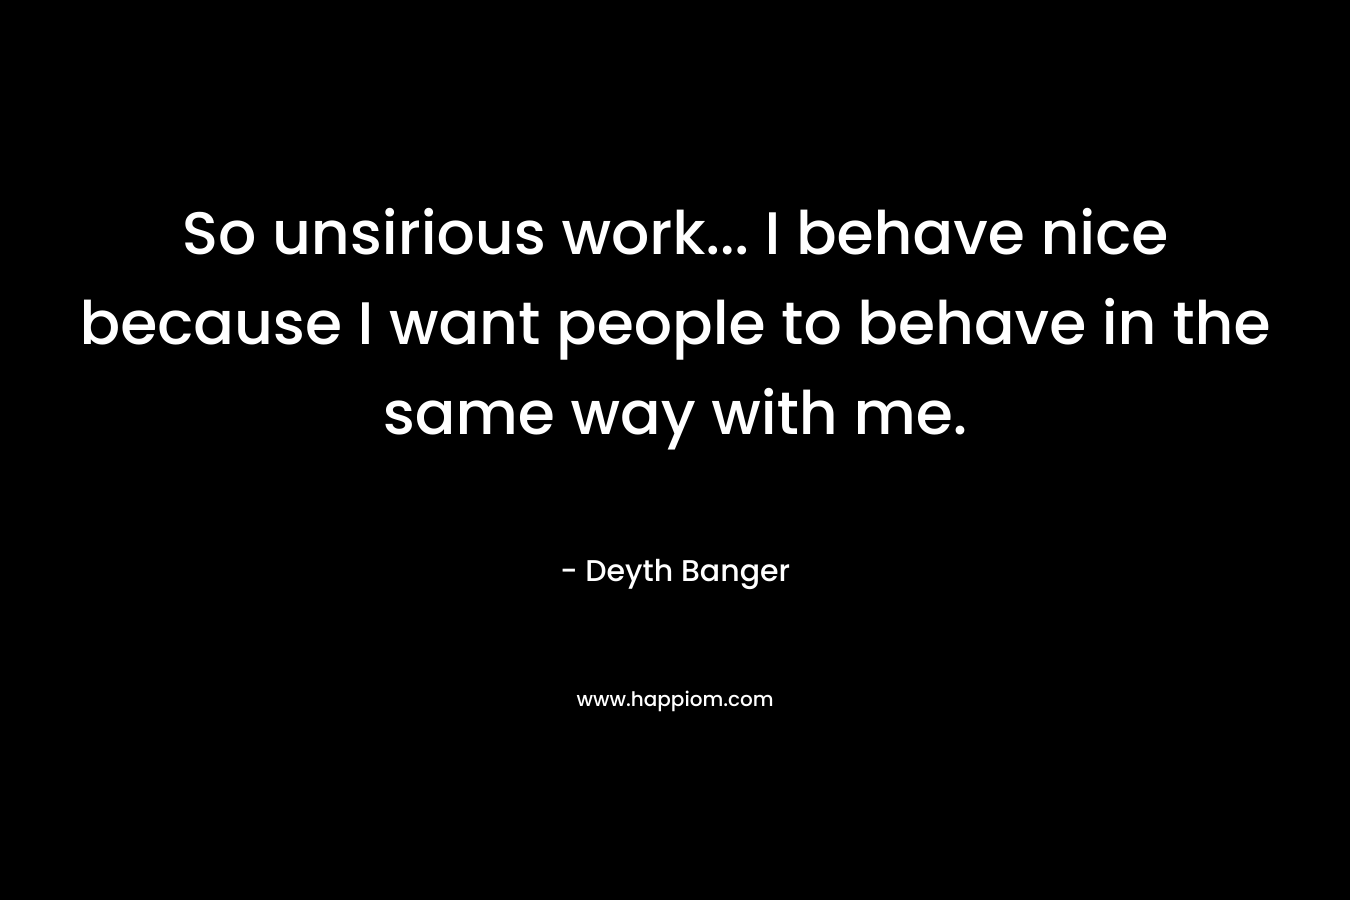 So unsirious work... I behave nice because I want people to behave in the same way with me.